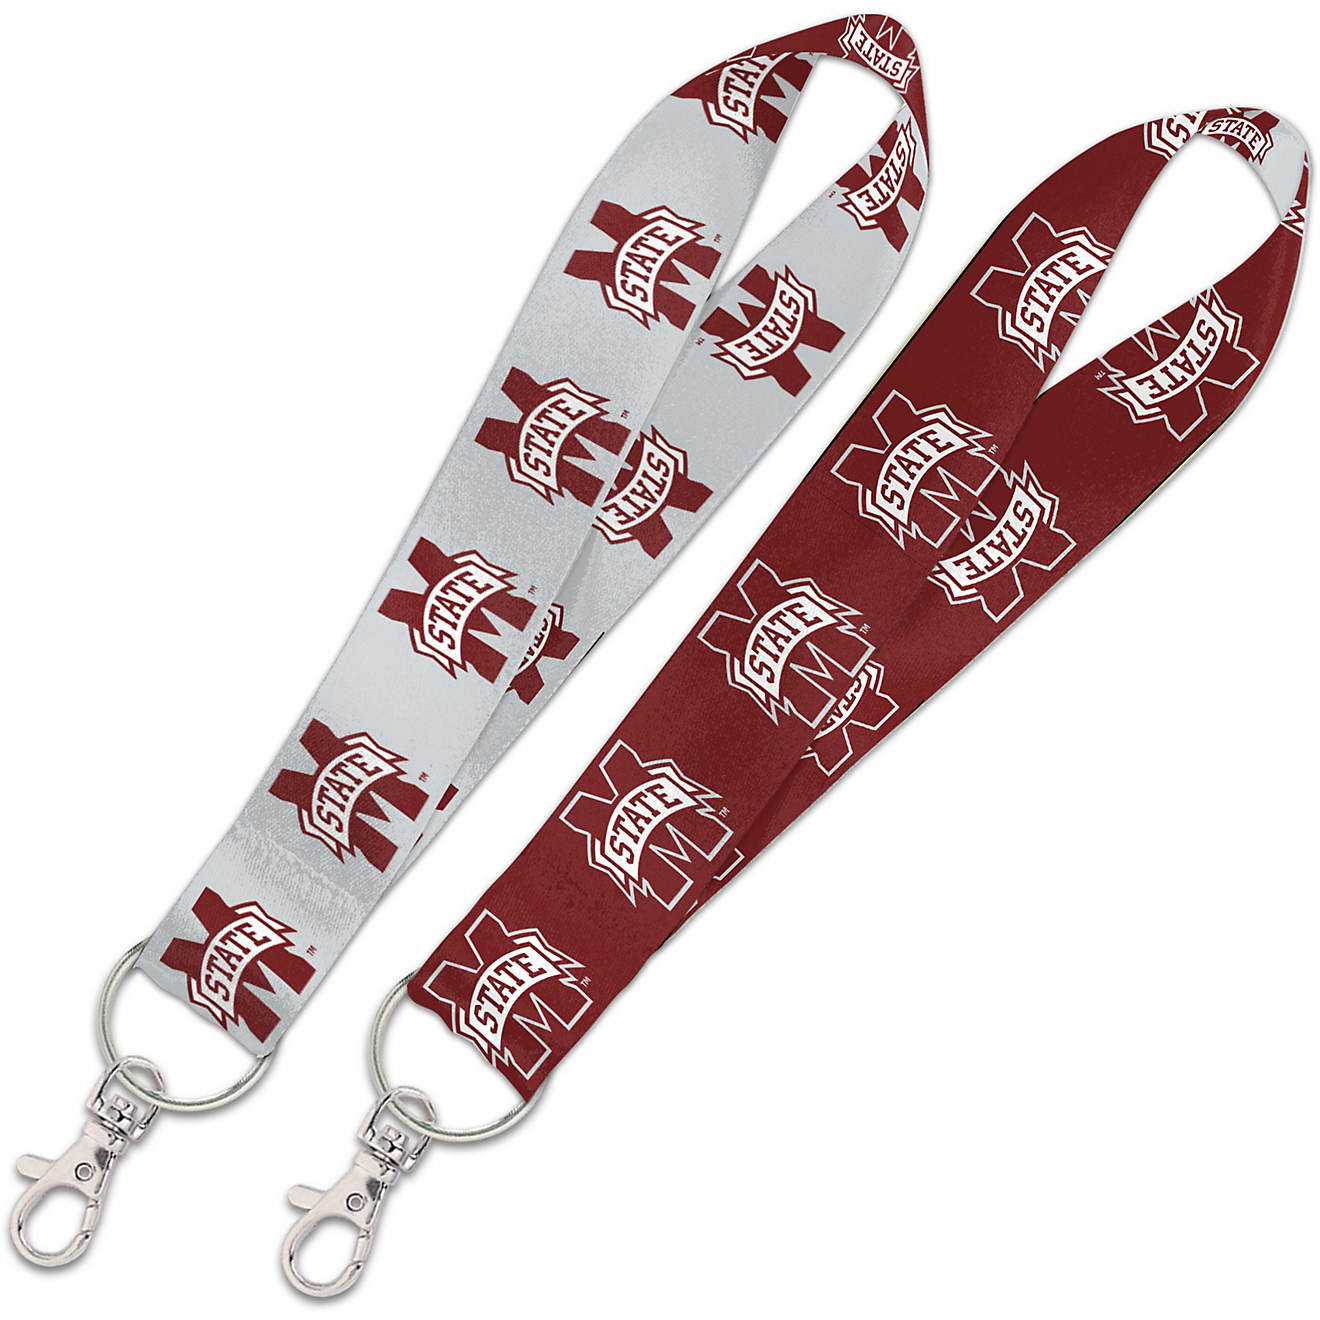 WinCraft Mississippi State University Lanyard Key Strap                                                                          - view number 1